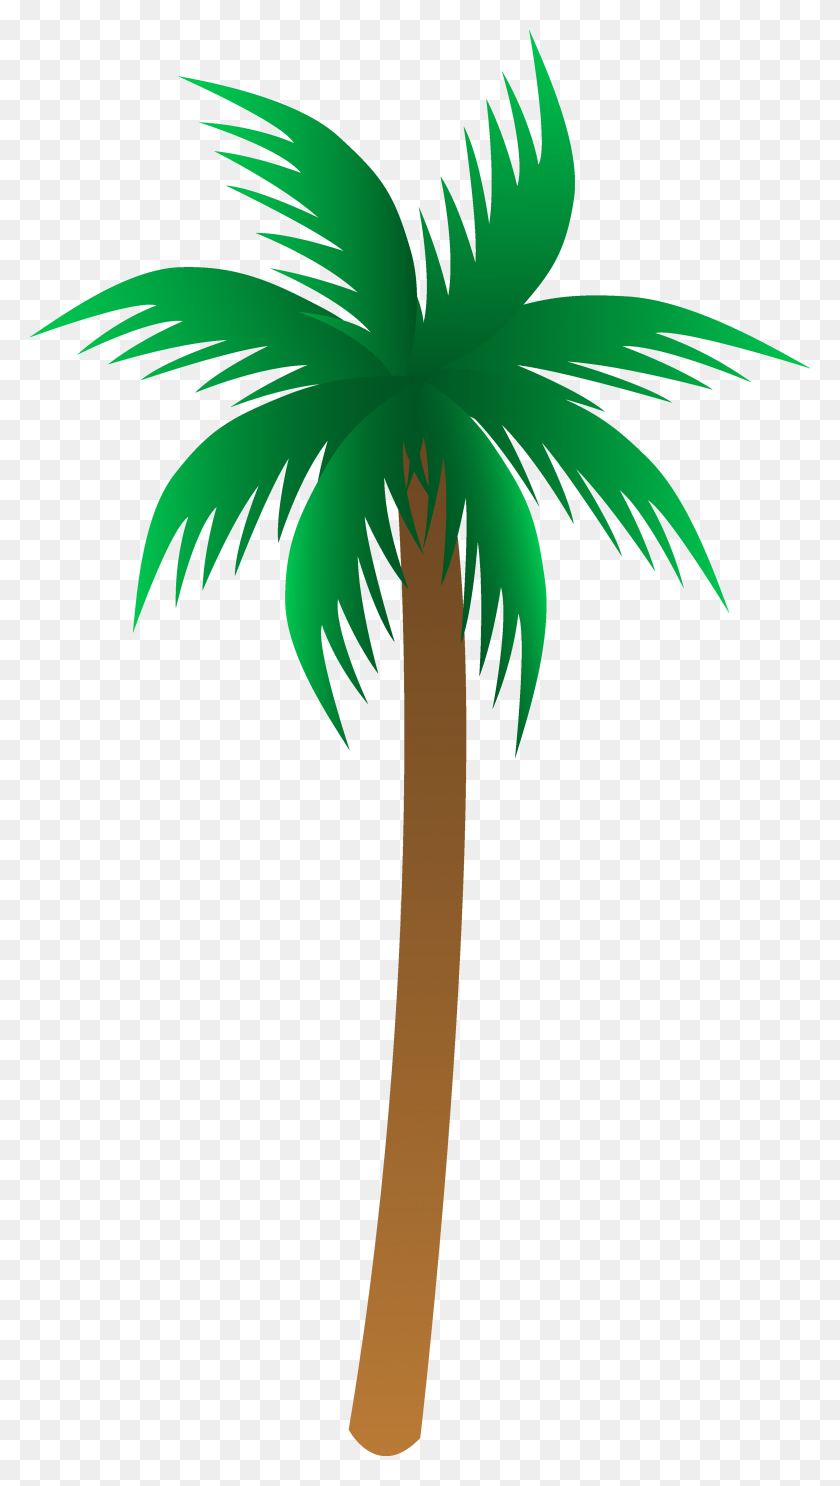 Palm Tree Clipart Black And White Clip Art Palm Trees Free Pano Palm Tree Clipart Black And White Stunning Free Transparent Png Clipart Images Free Download